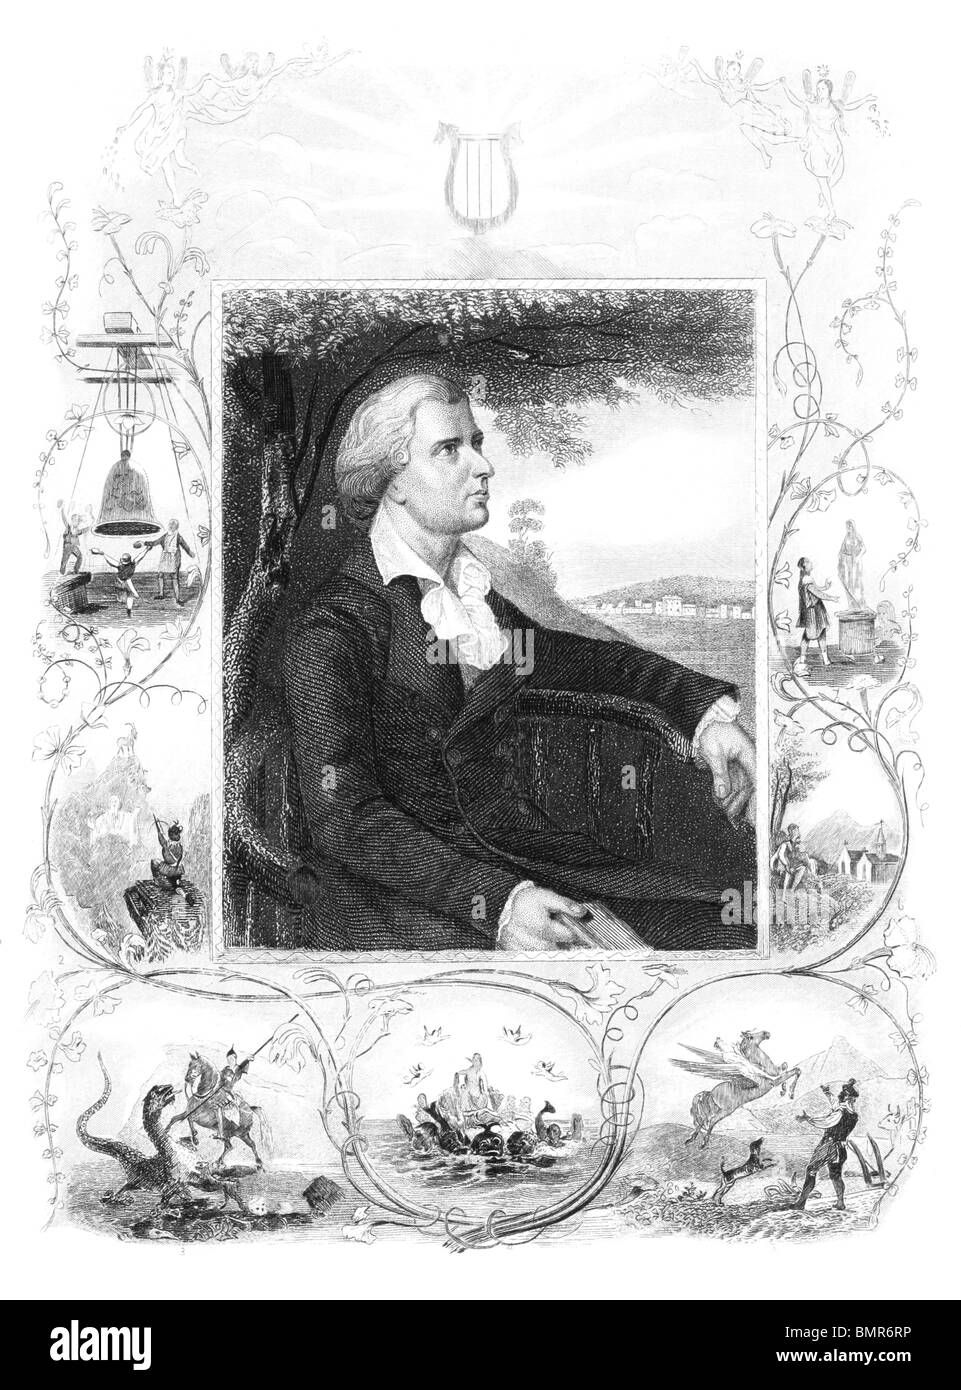 Friedrich Schiller (1759-1805) on engraving from the 1800s. German poet, philosopher, playwright. and historian. Stock Photo